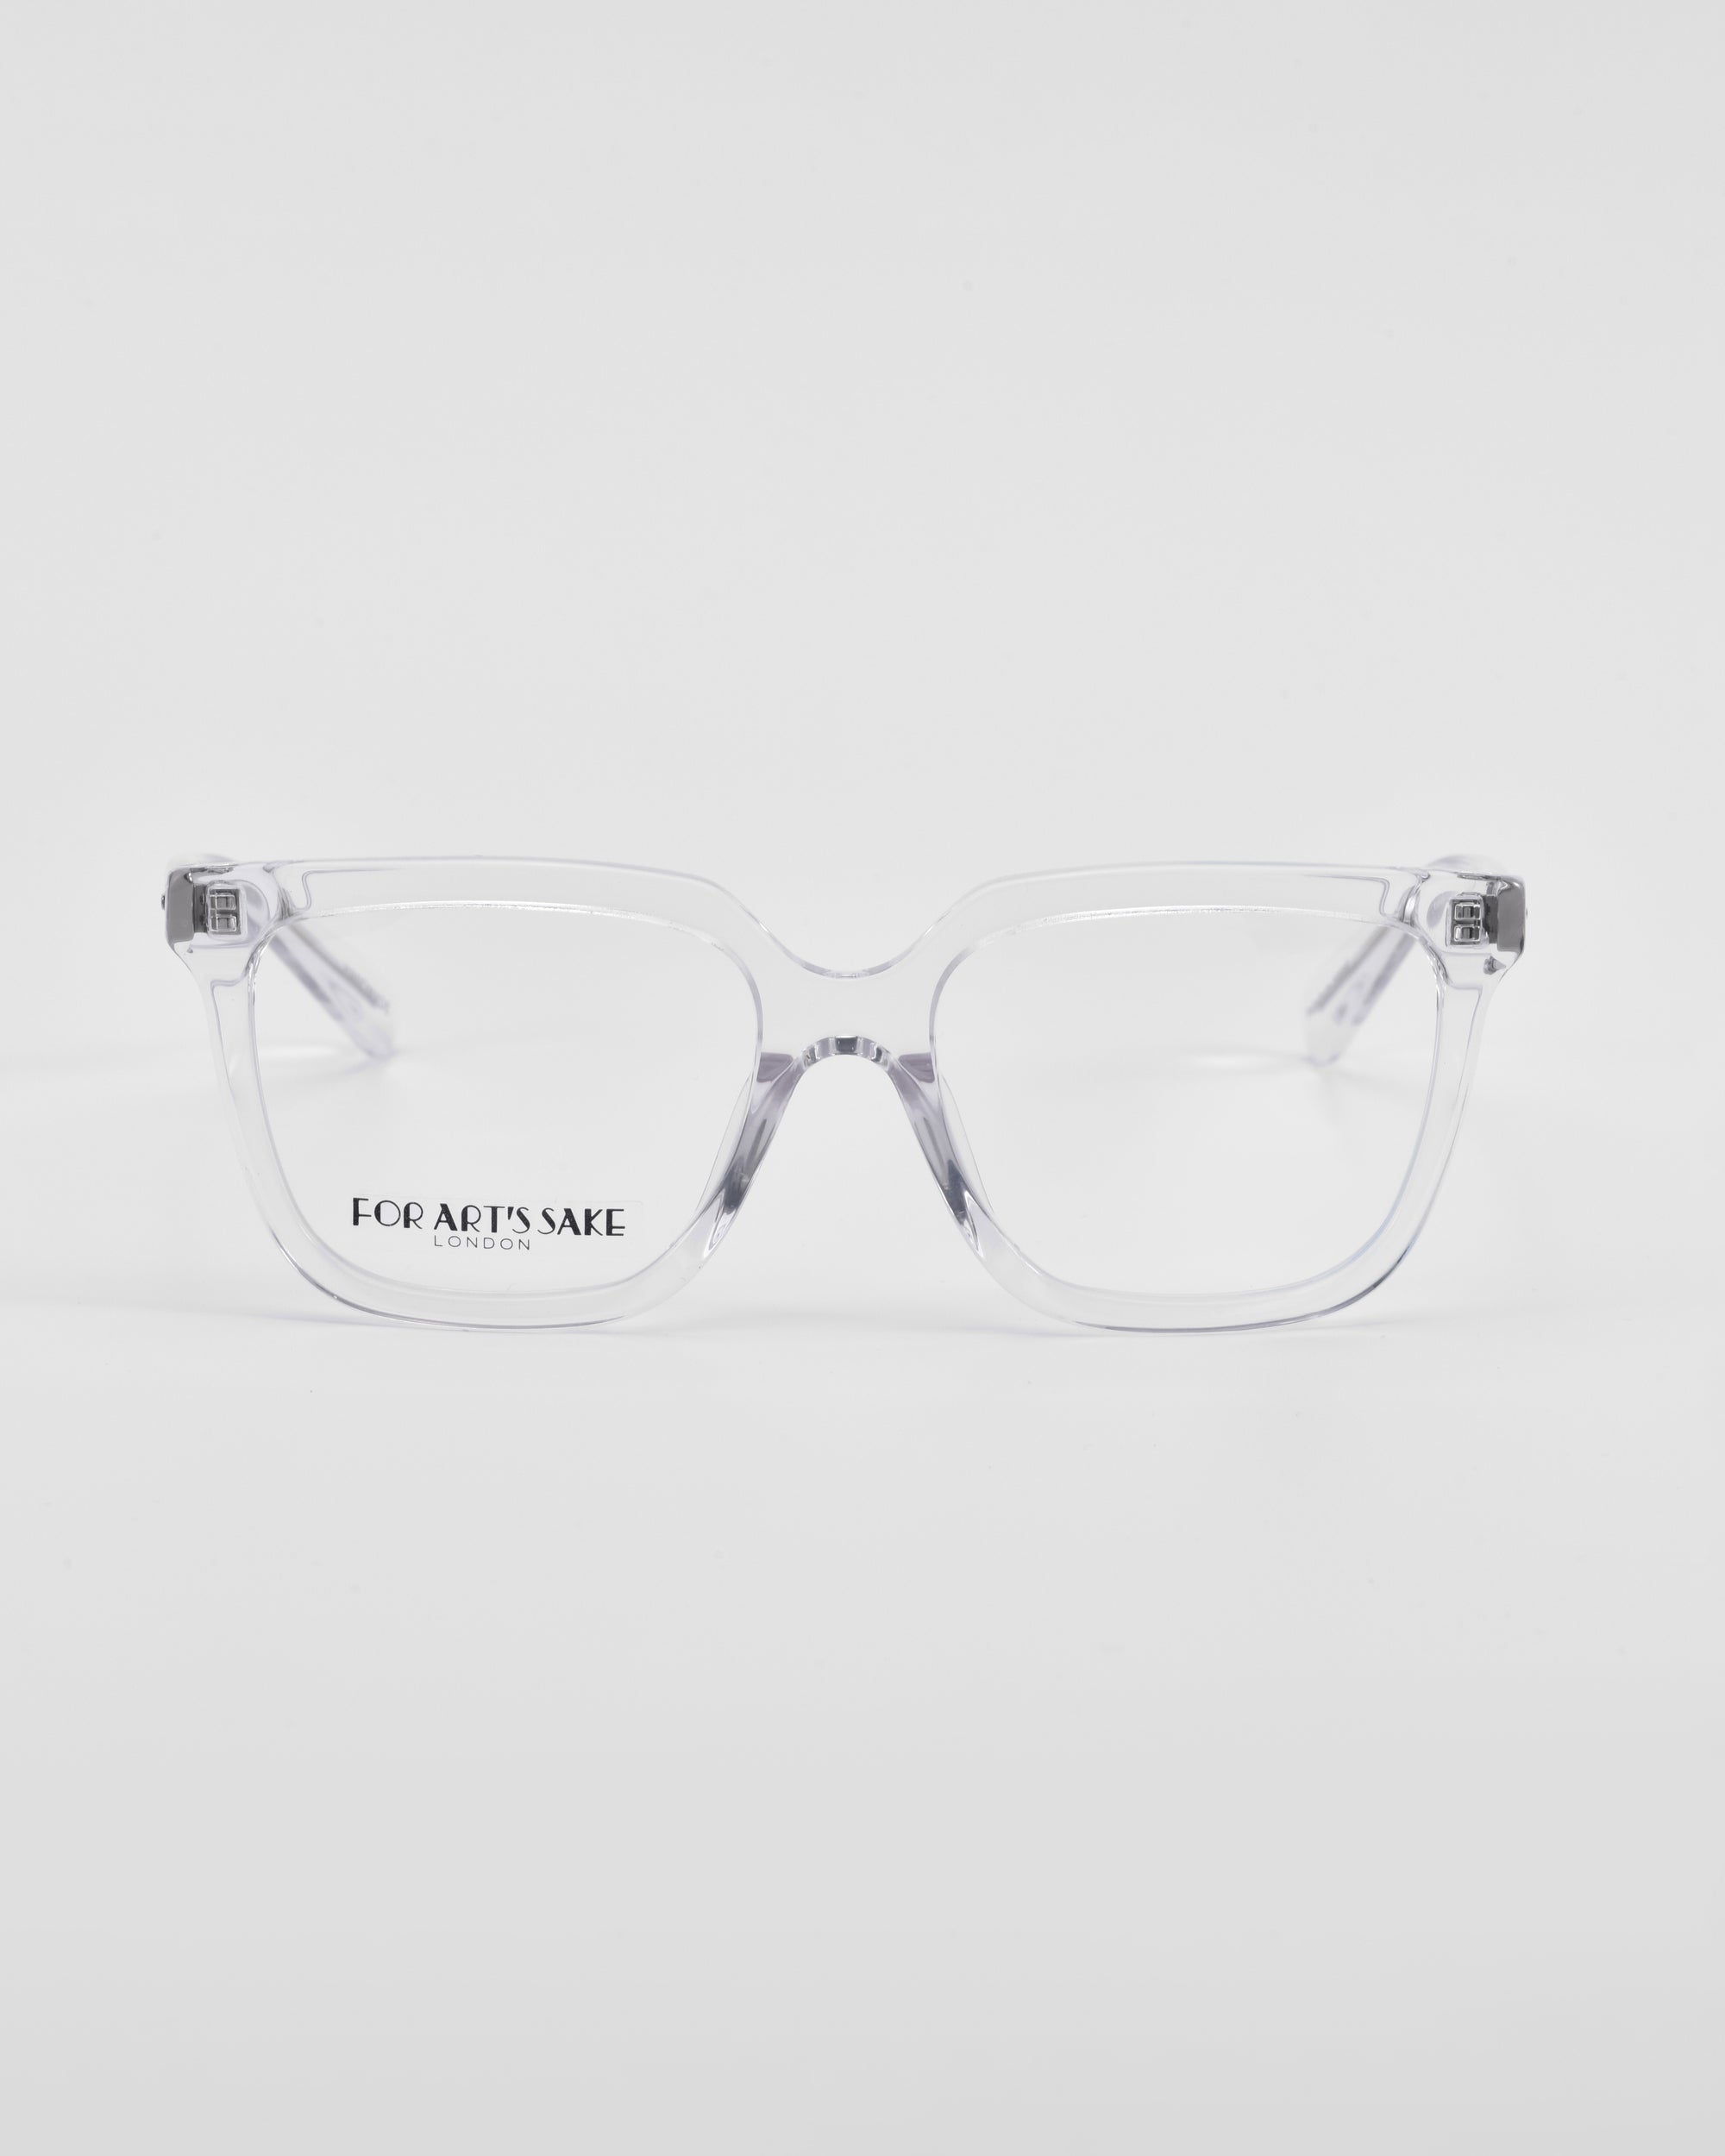 A pair of rectangular, clear-framed eyeglasses with thin arms and transparent lenses is placed against a plain white background. The brand name "For Art's Sake®" is visible on the left lens, showcasing a classic square silhouette perfect for prescription service.